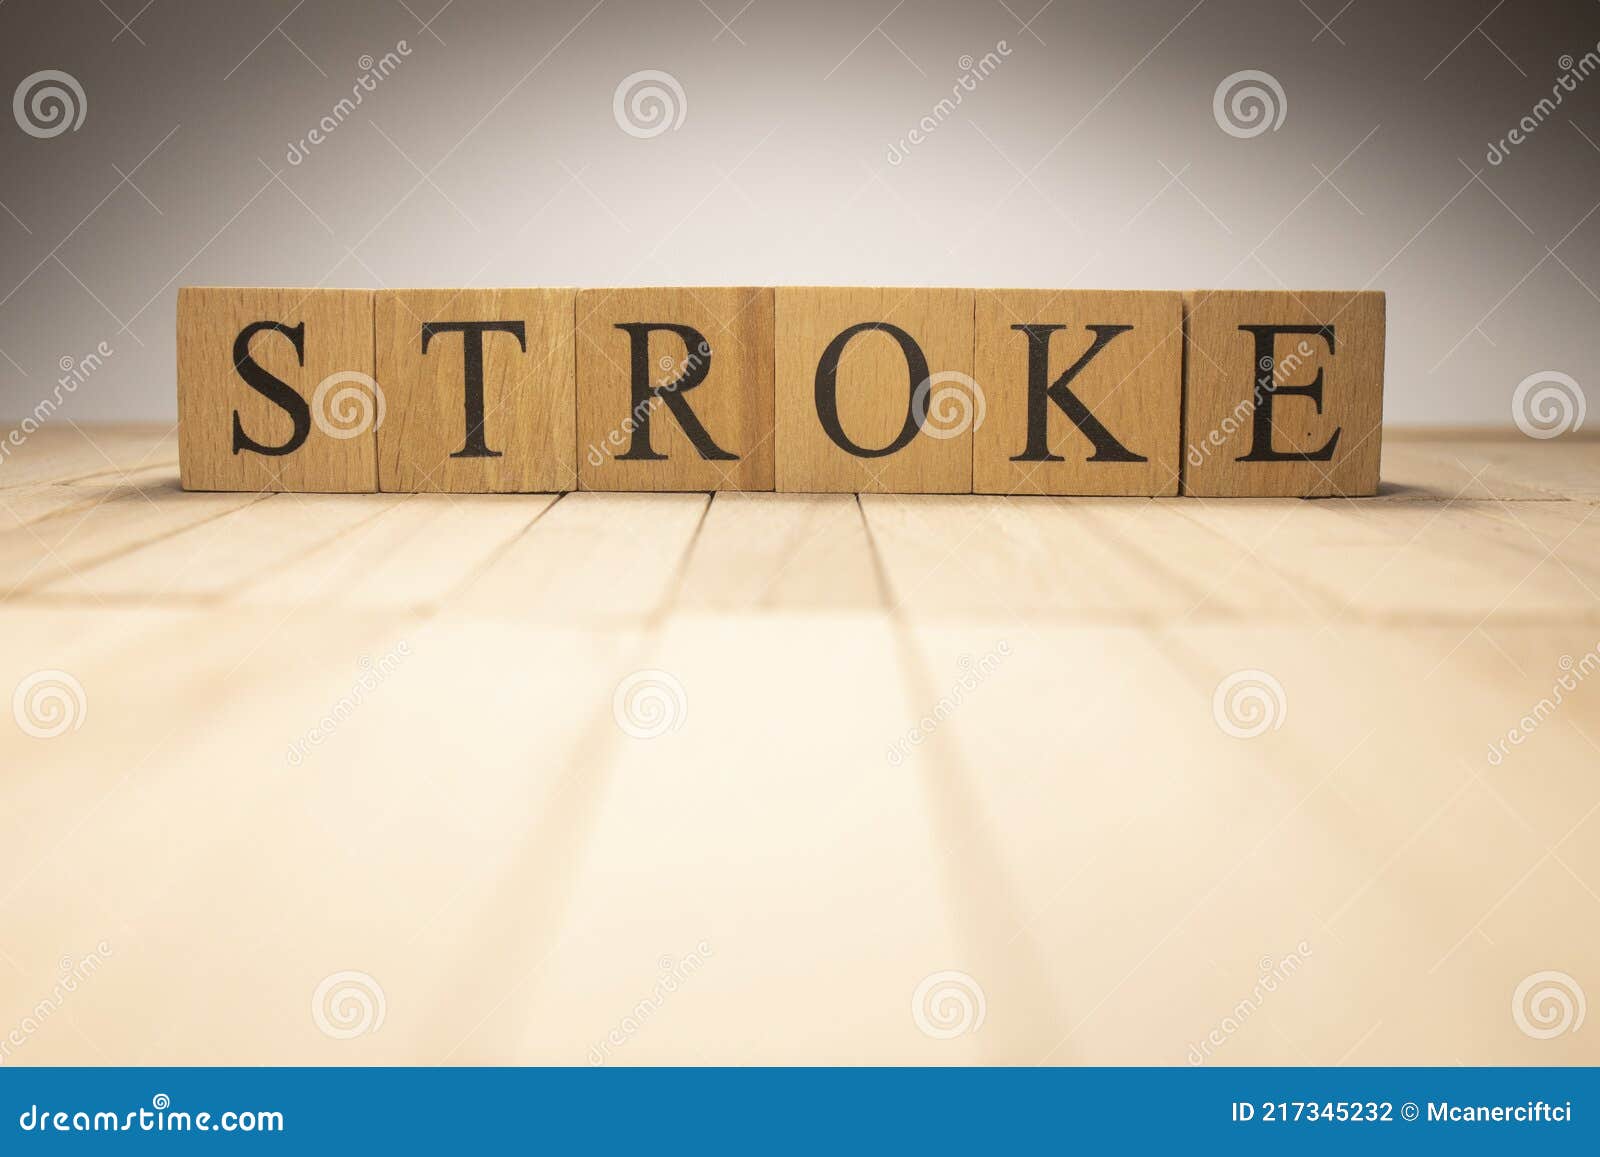 the word apoplexy stroke was created from wooden cubes. health and life.